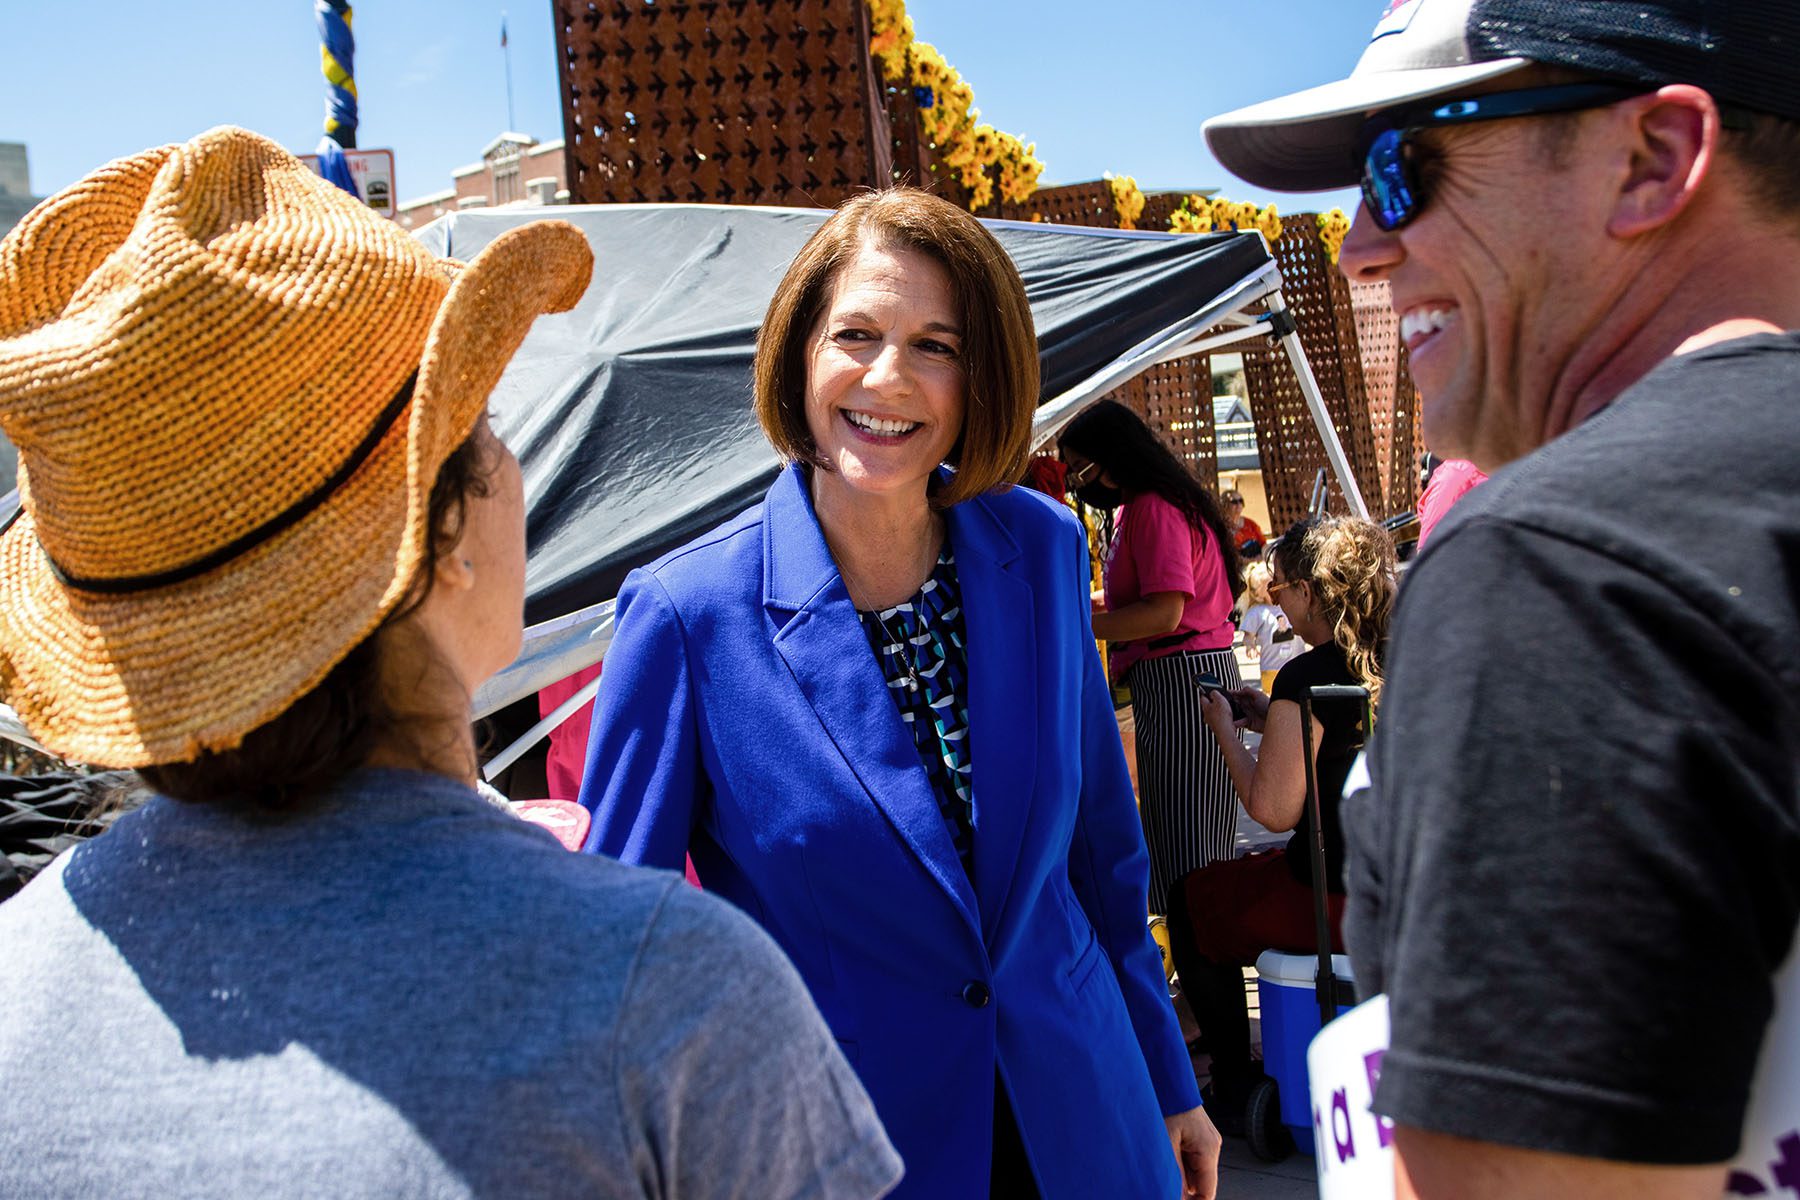 Sen. Catherine Cortez Masto speaks with constituents at an abortion rights rally.